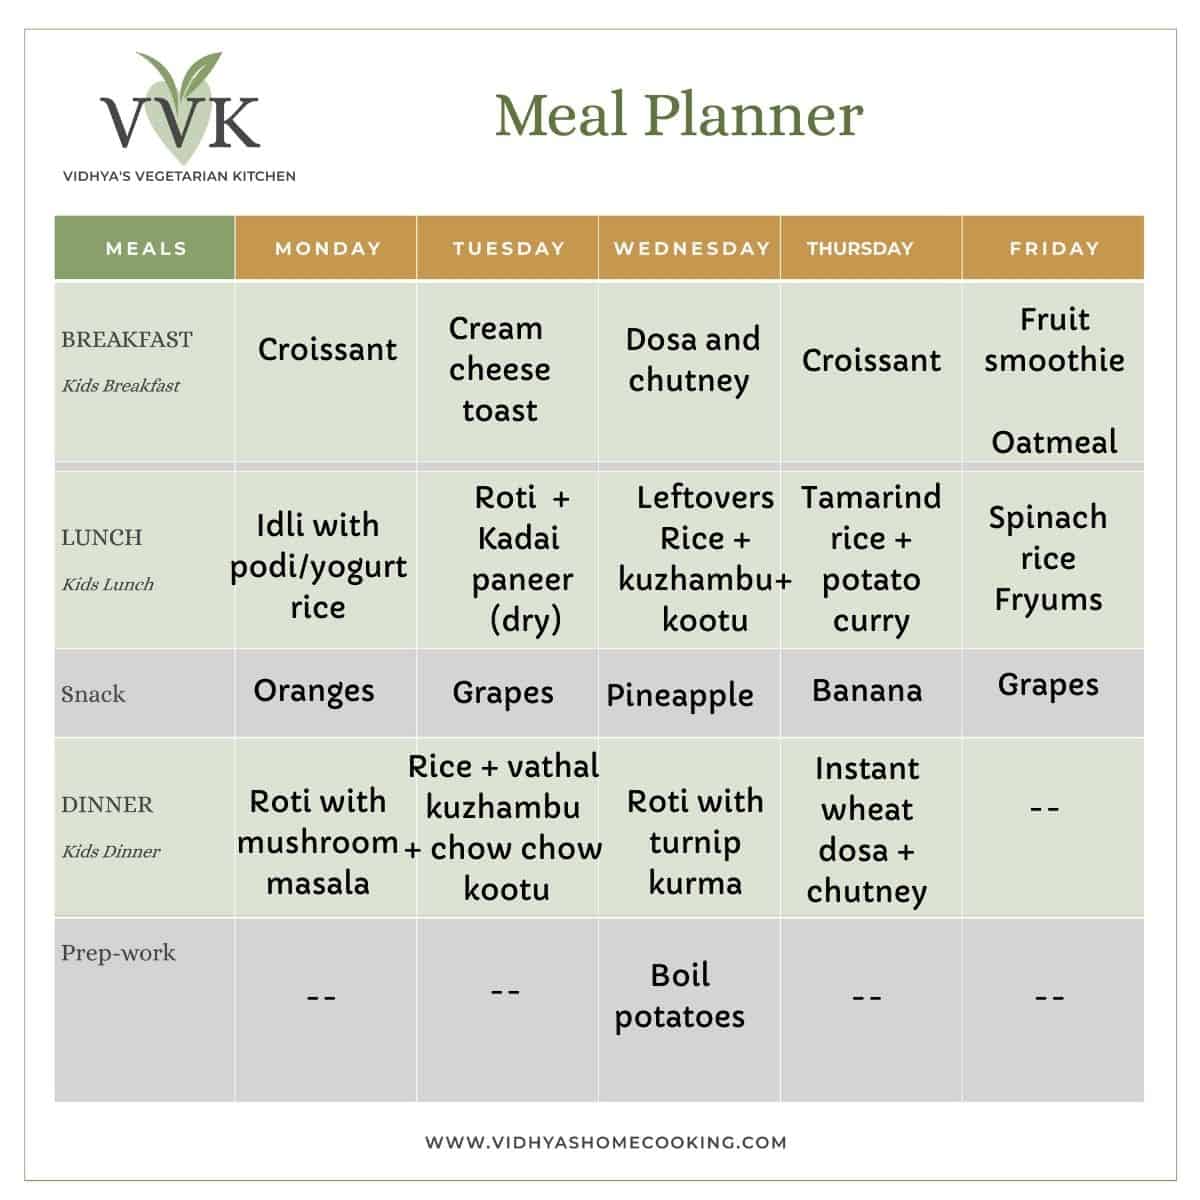 weekly meal planner template - VVK meal planner template with breakfast, lunch and dinner